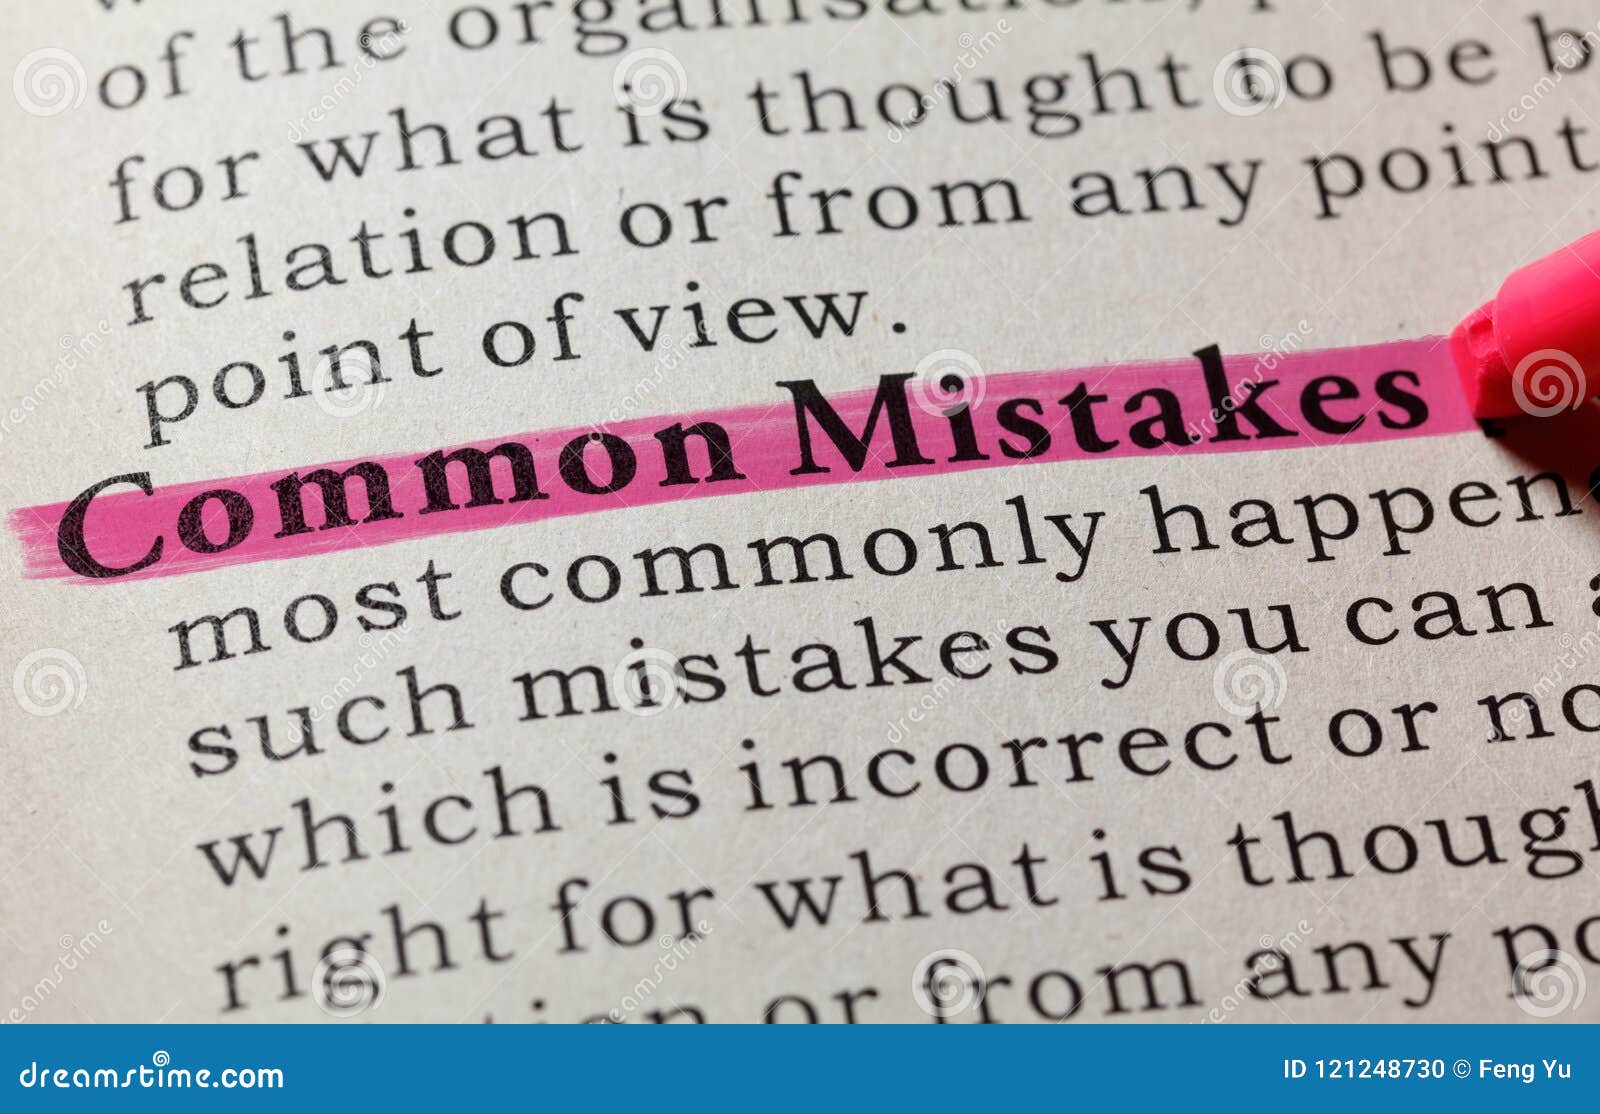 definition of common mistakes